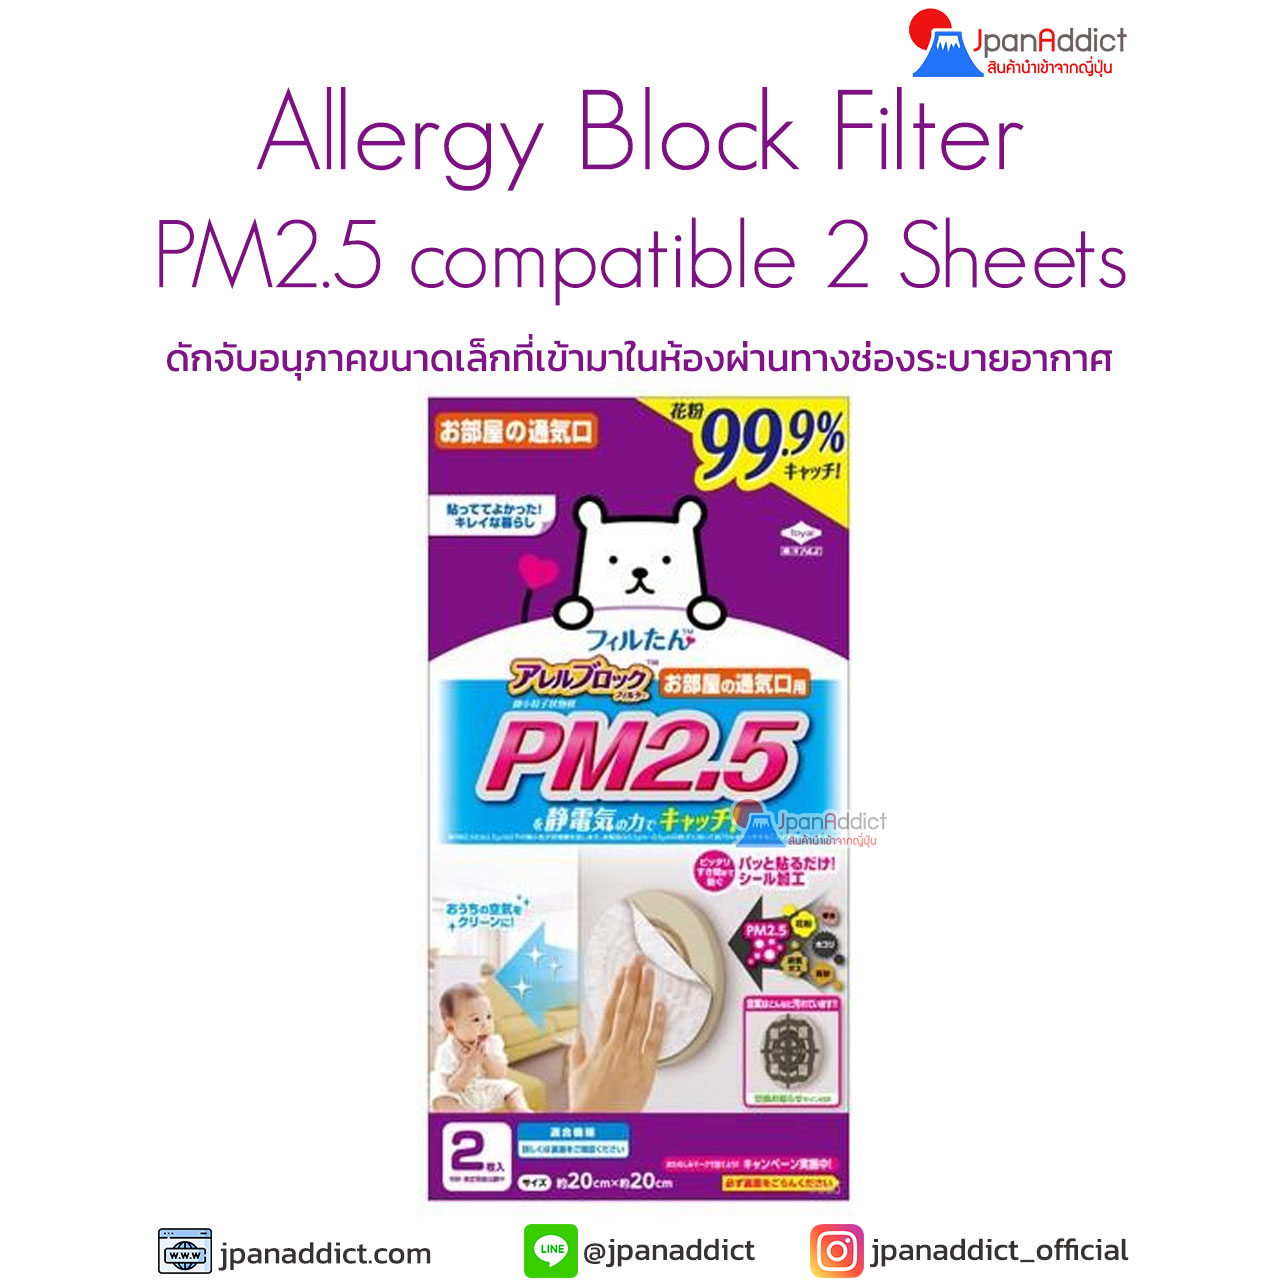 Allergy Block Filter PM2.5 compatible 2 Sheets